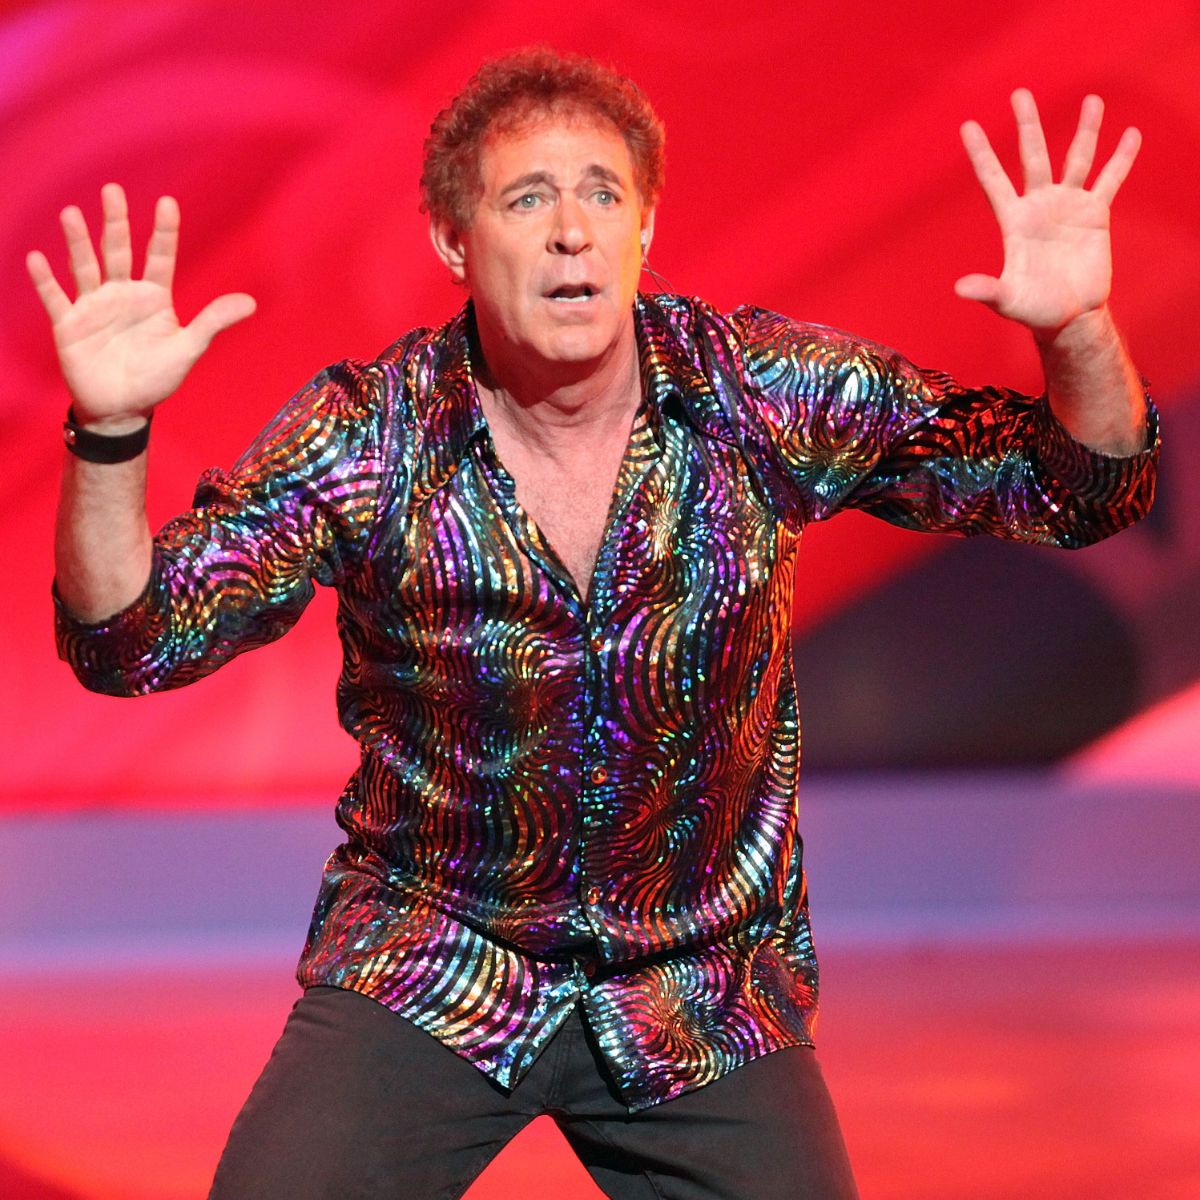 how old is barry williams